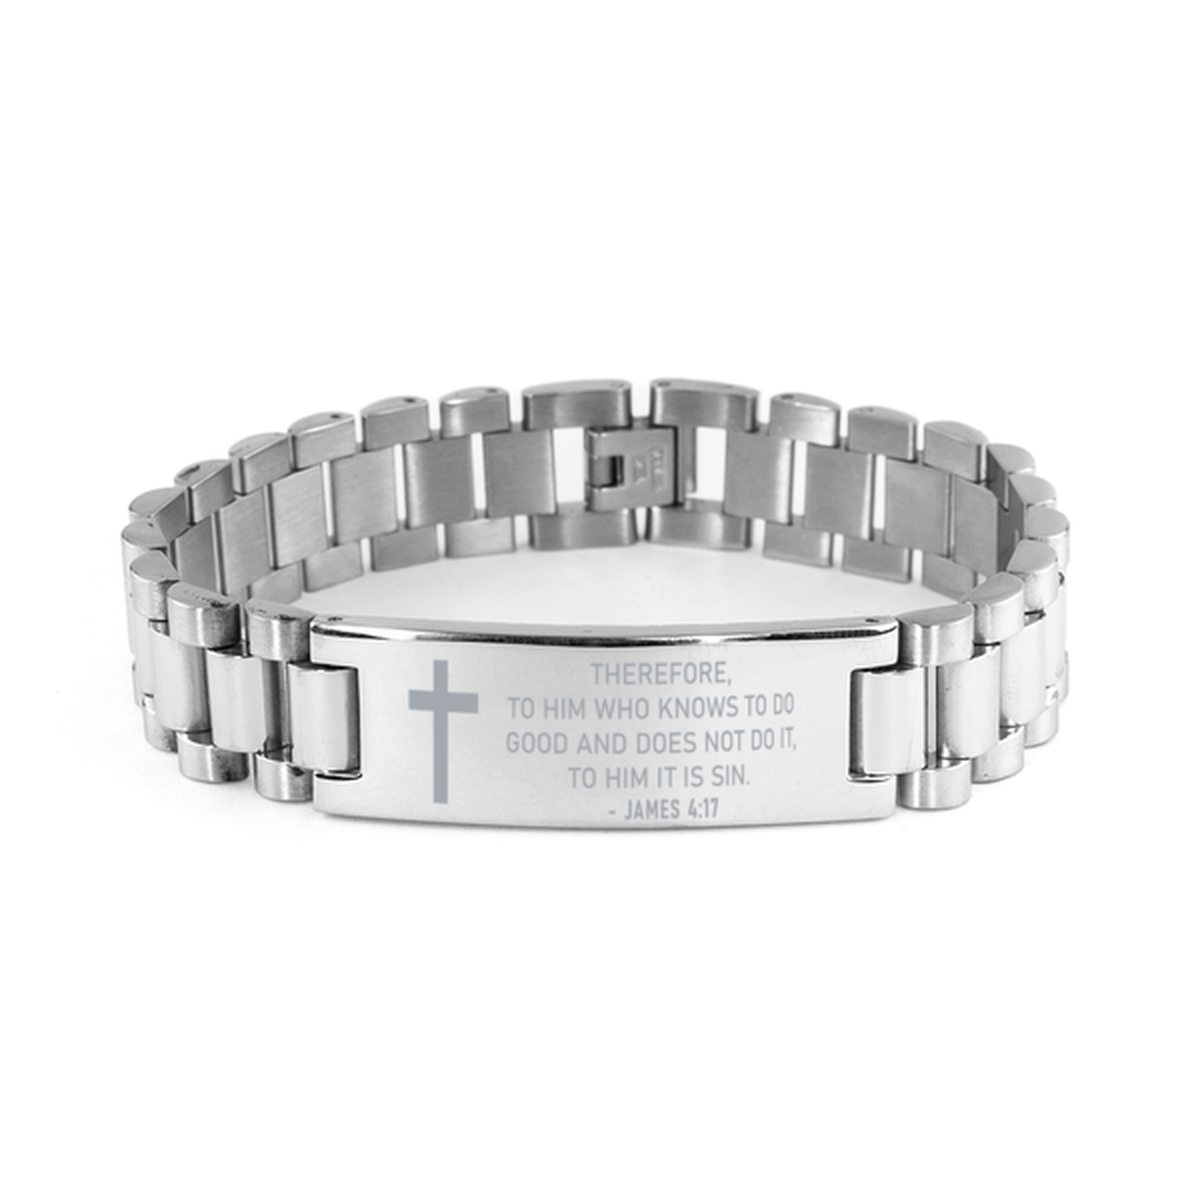 Christian Ladder Stainless Steel Bracelet, James 4:17 Therefore, To Him Who Knows To Do Good And Does, Motivational Bible Verse Gifts For Men Women